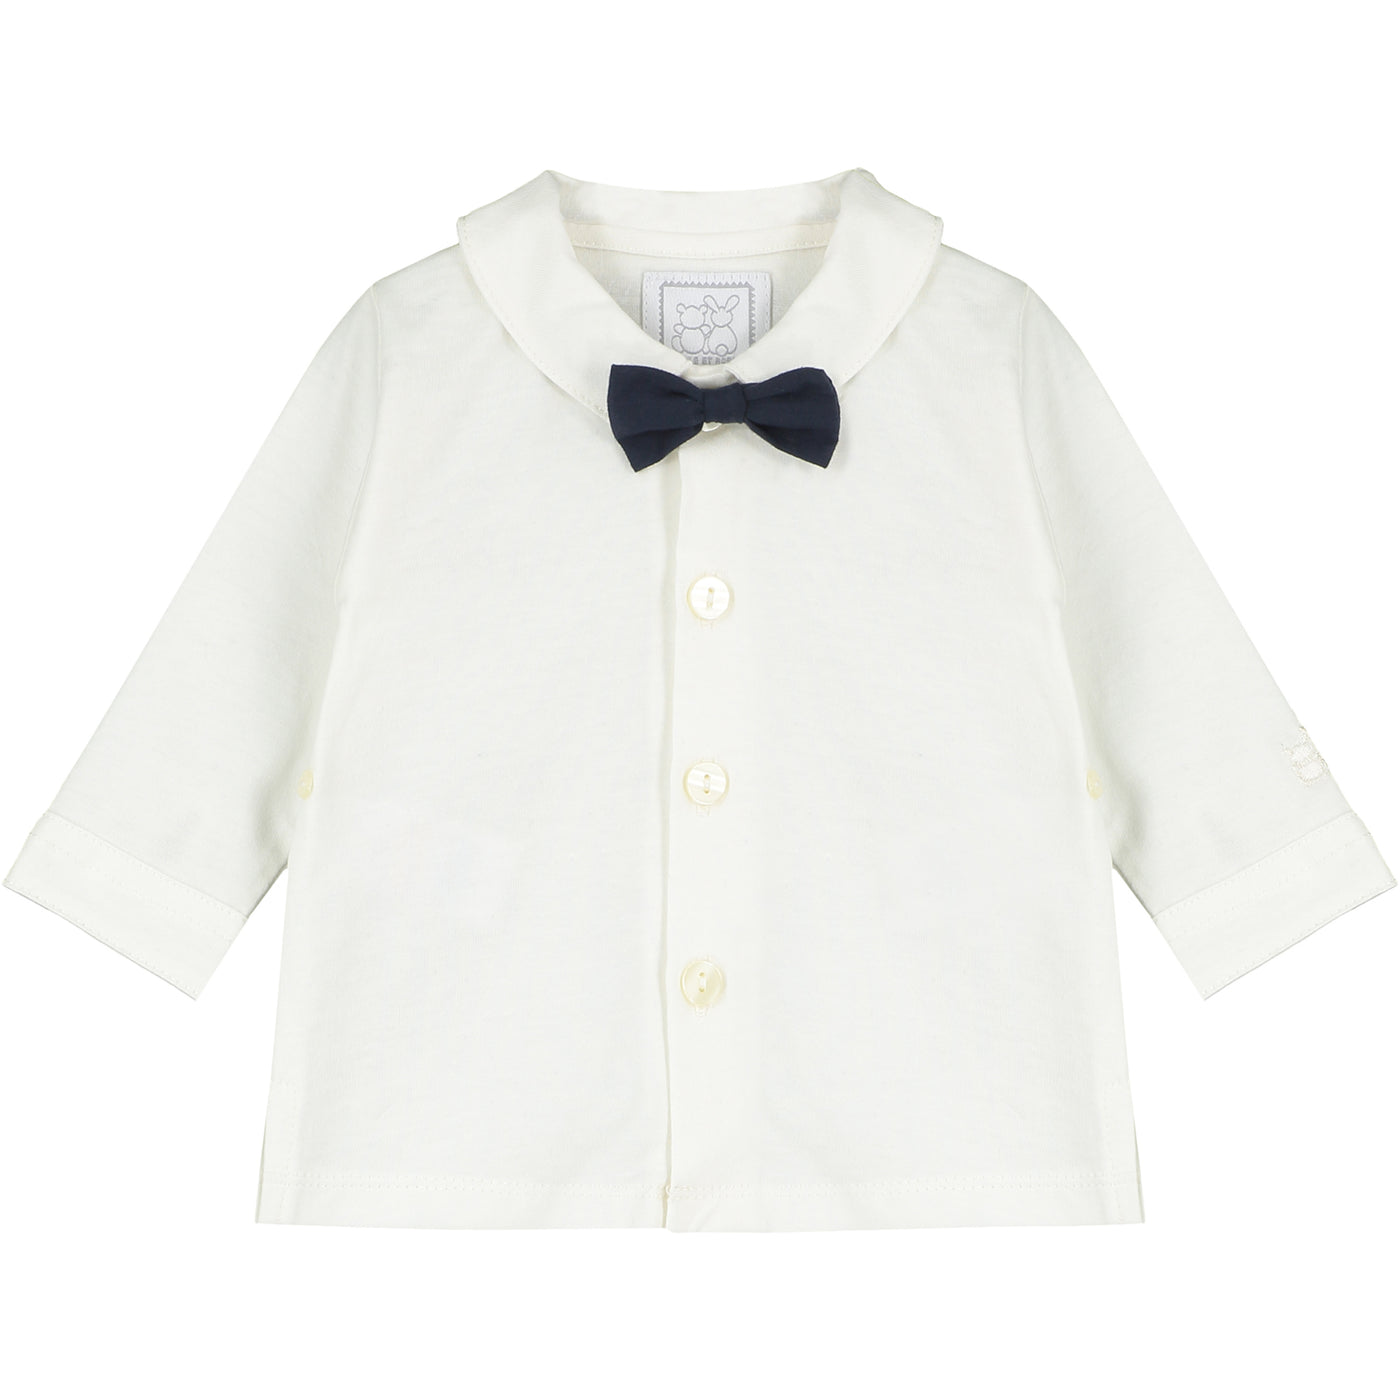 Campbell Baby Boys Formal White Shirt